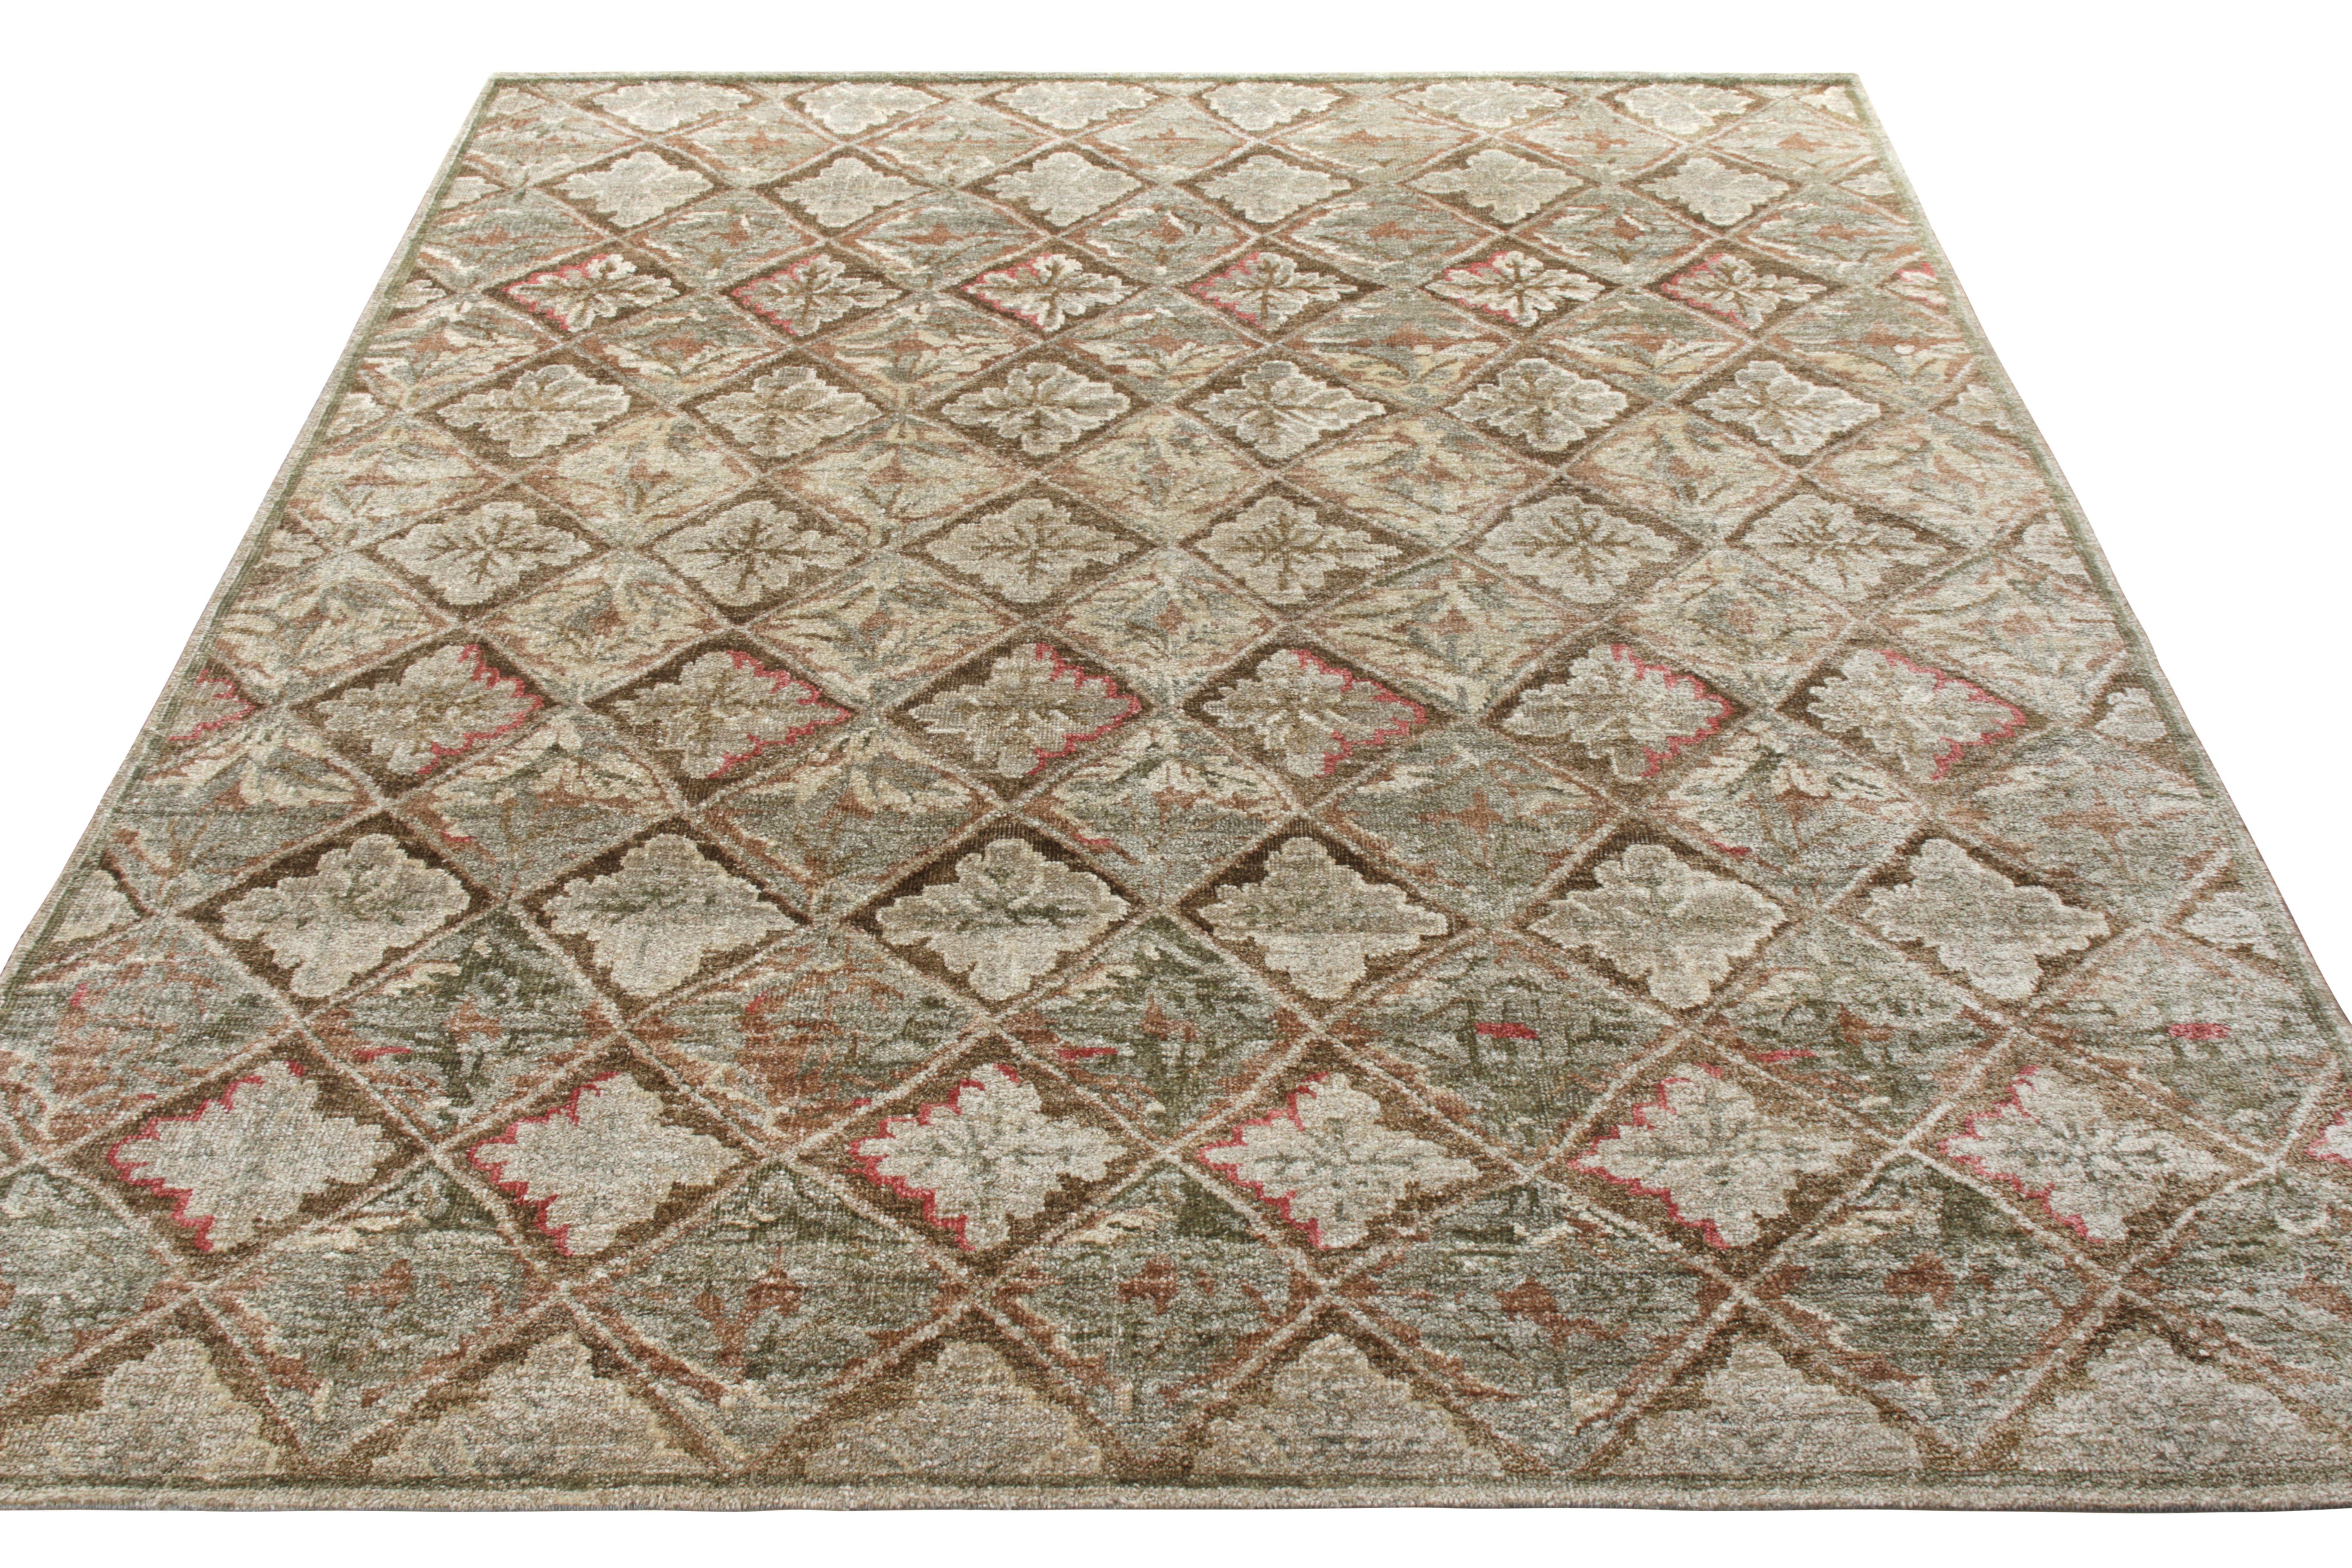 Rug & Kilim presents an 8x10 rug inspired by 18th century Aubusson rugs in the new additions to their European Collection. 

Hand-knotted in wool and silk, its design is an all-over pattern with diamond trellises and floral motifs in green and